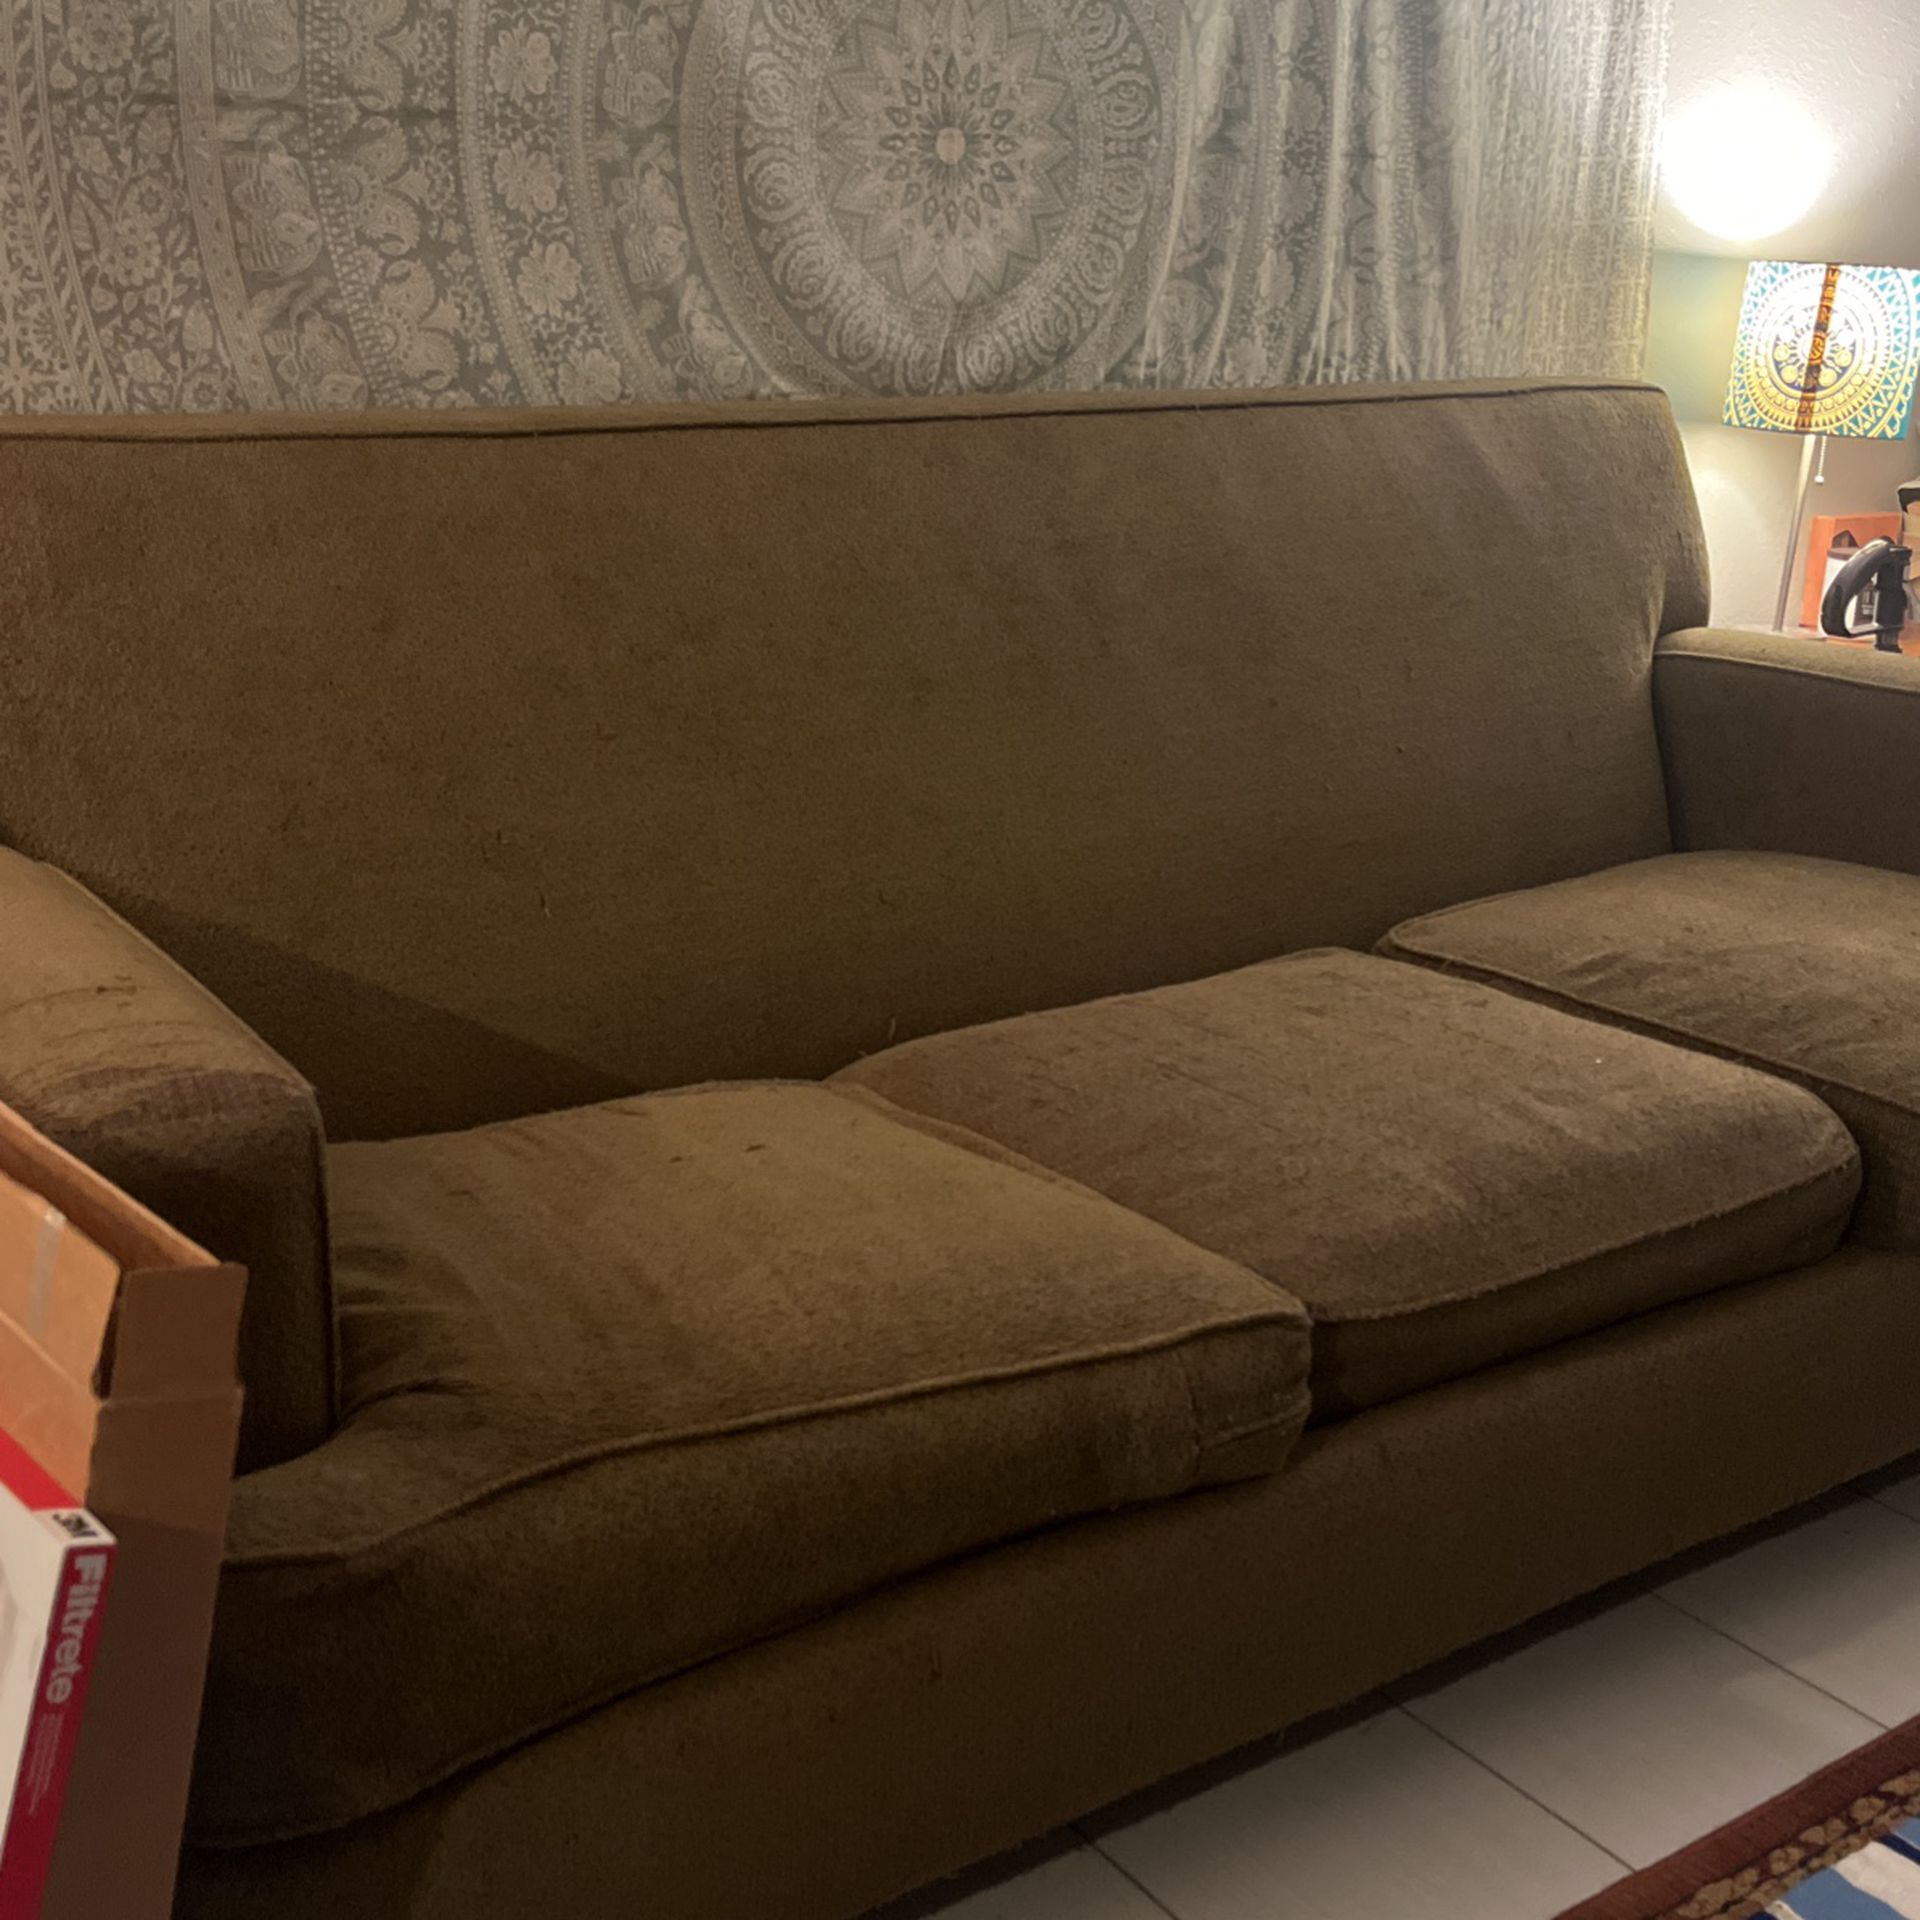 Green Couch for Sale!